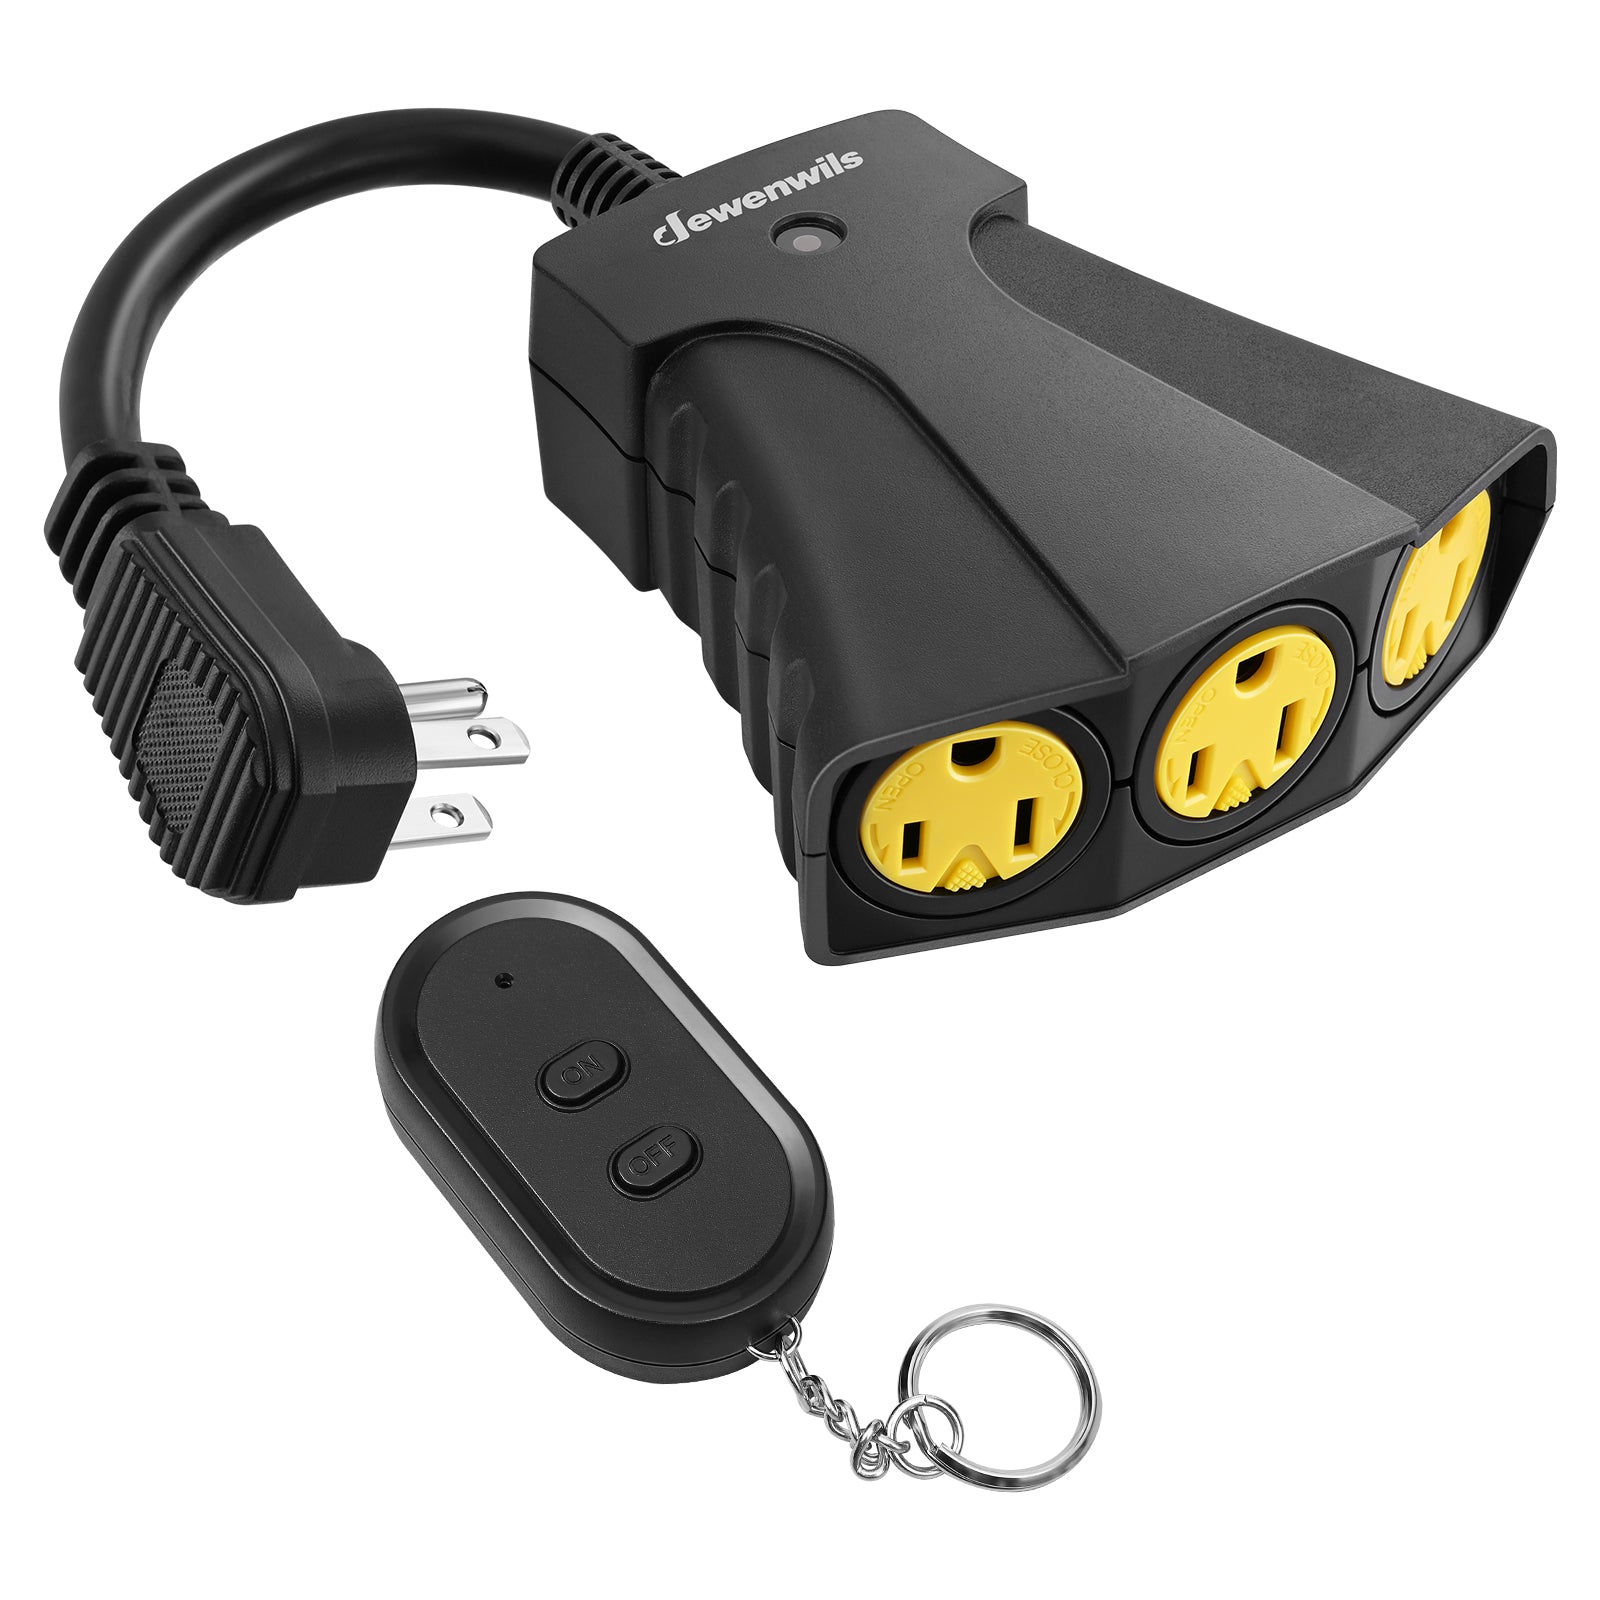 Eco Plugs Outdoor 2-Outlet Wireless Remote Control